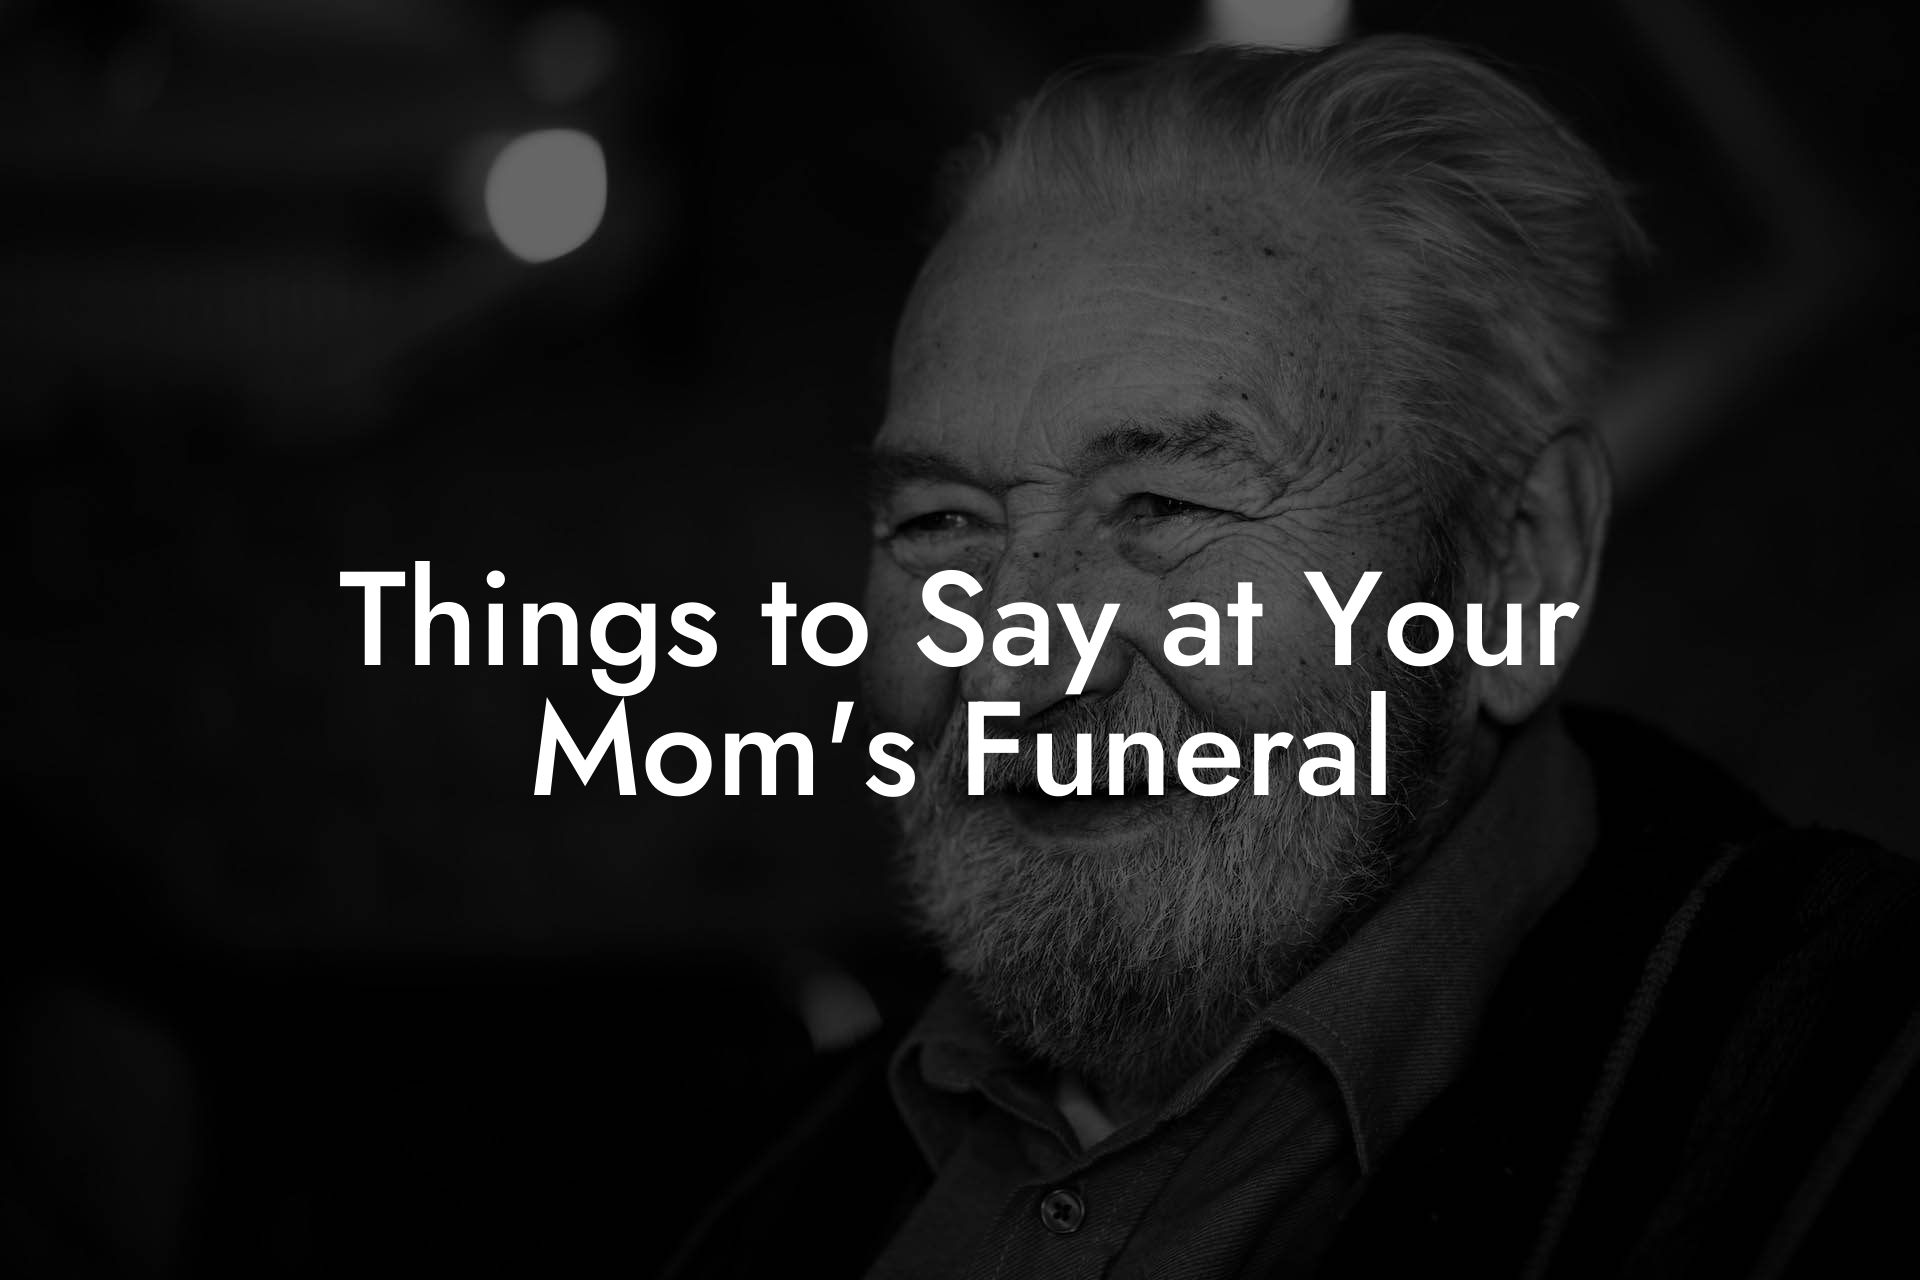 Things to Say at Your Mom's Funeral